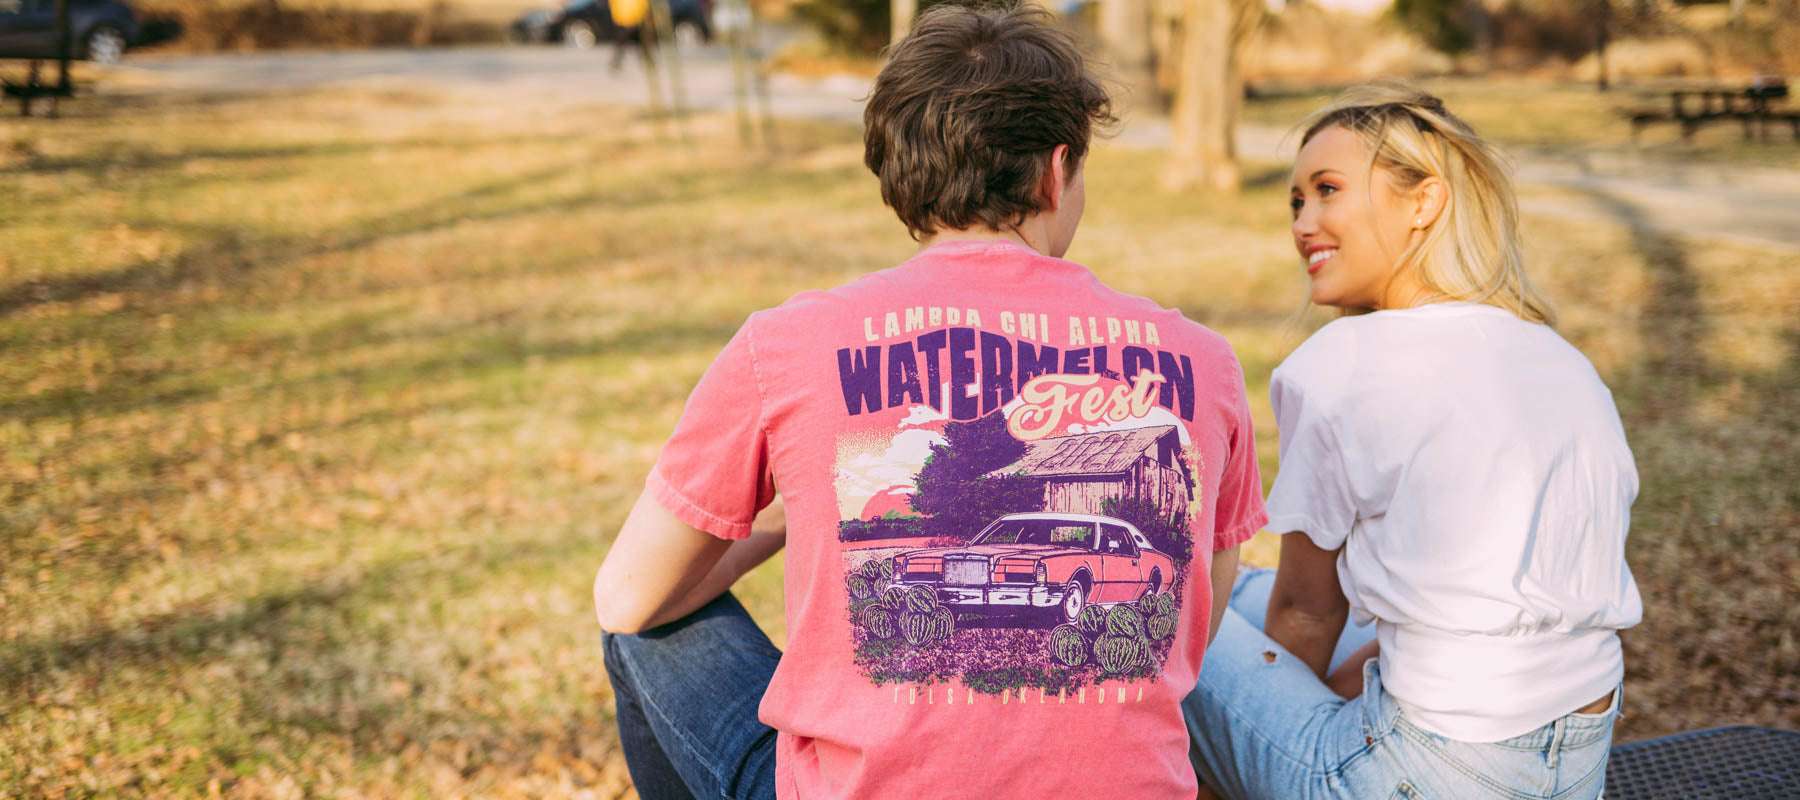 Custom Tees To Make Fraternity Events Better